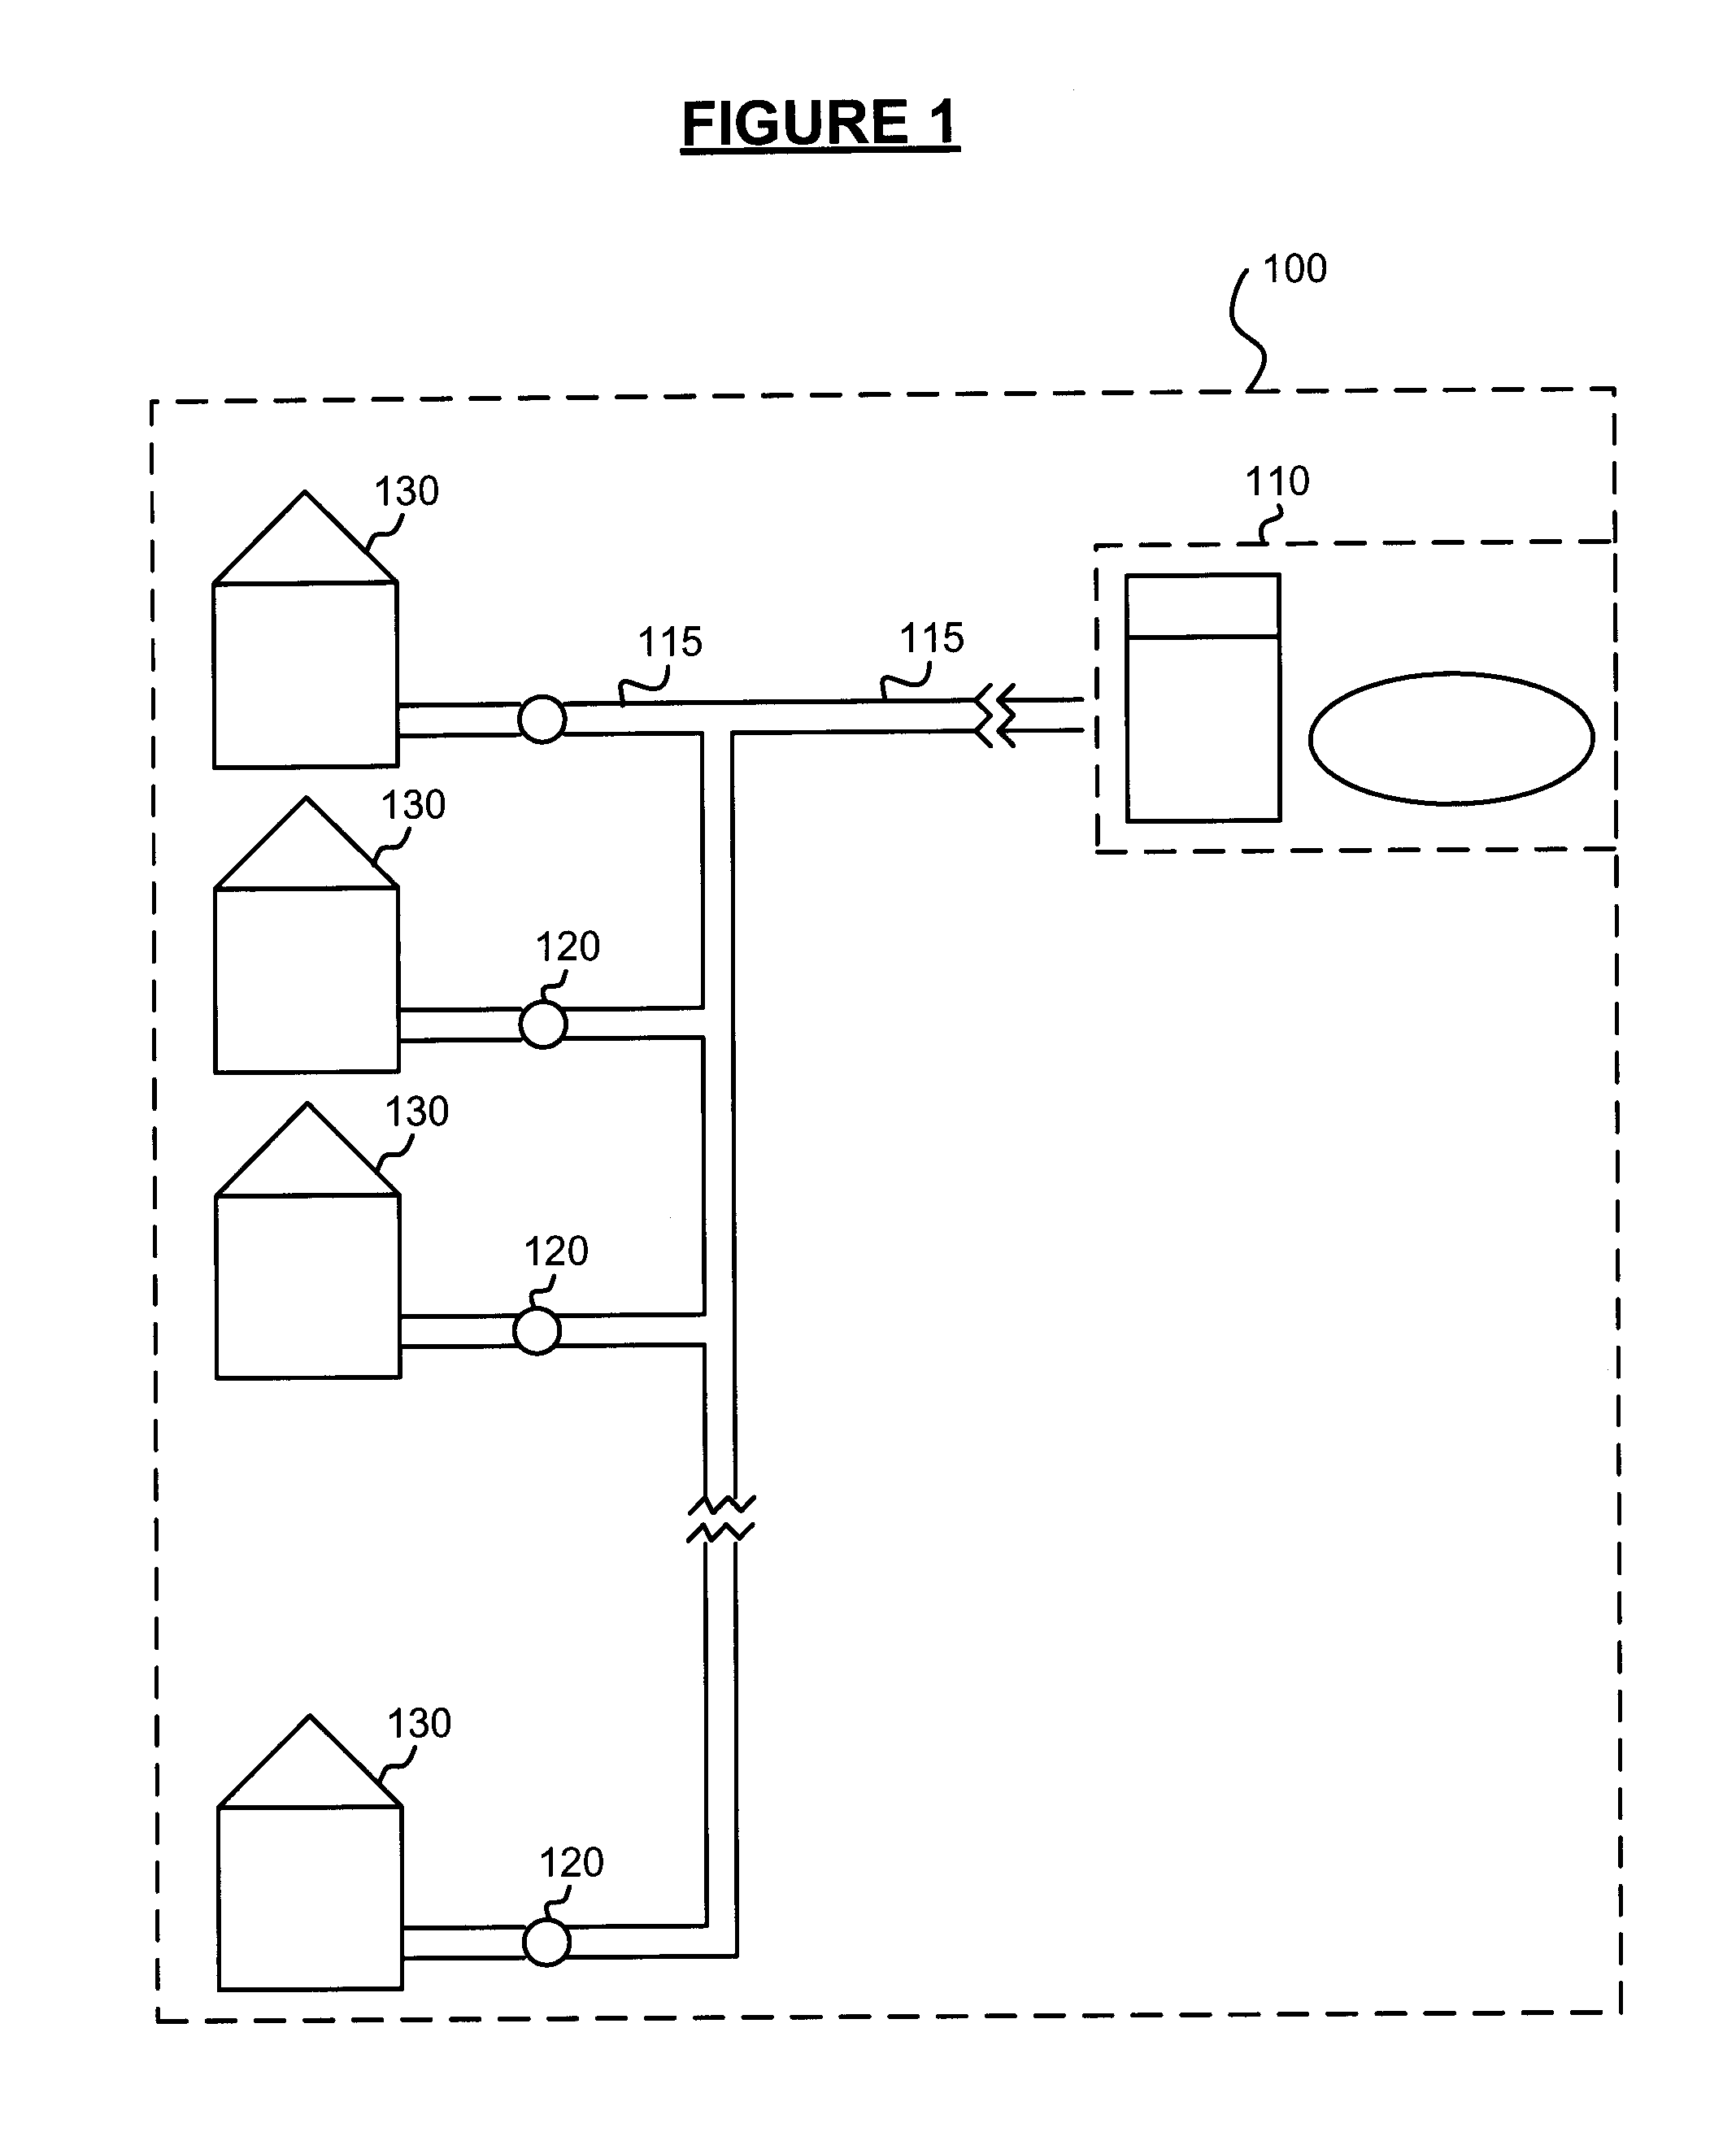 Systems and Methods for Generating Power Through The Flow of Water